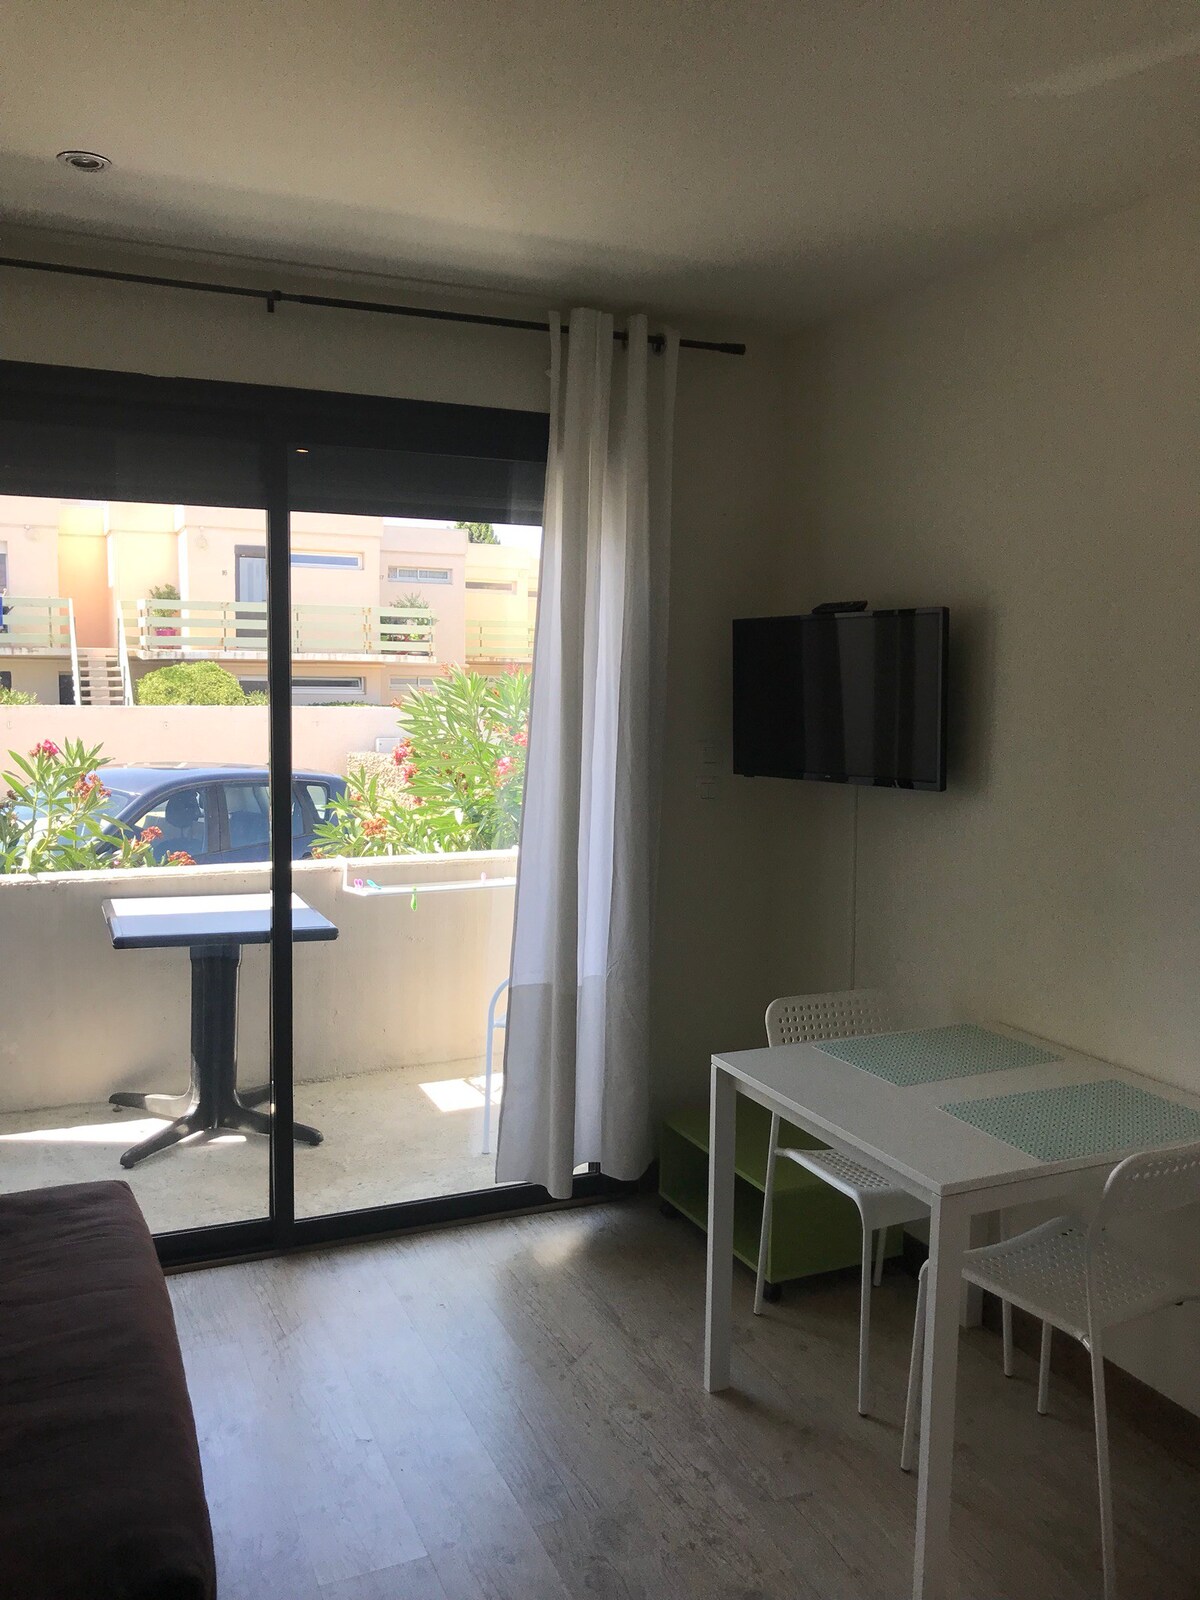 Port Leucate : locations d'appartements - Leucate, France | Airbnb